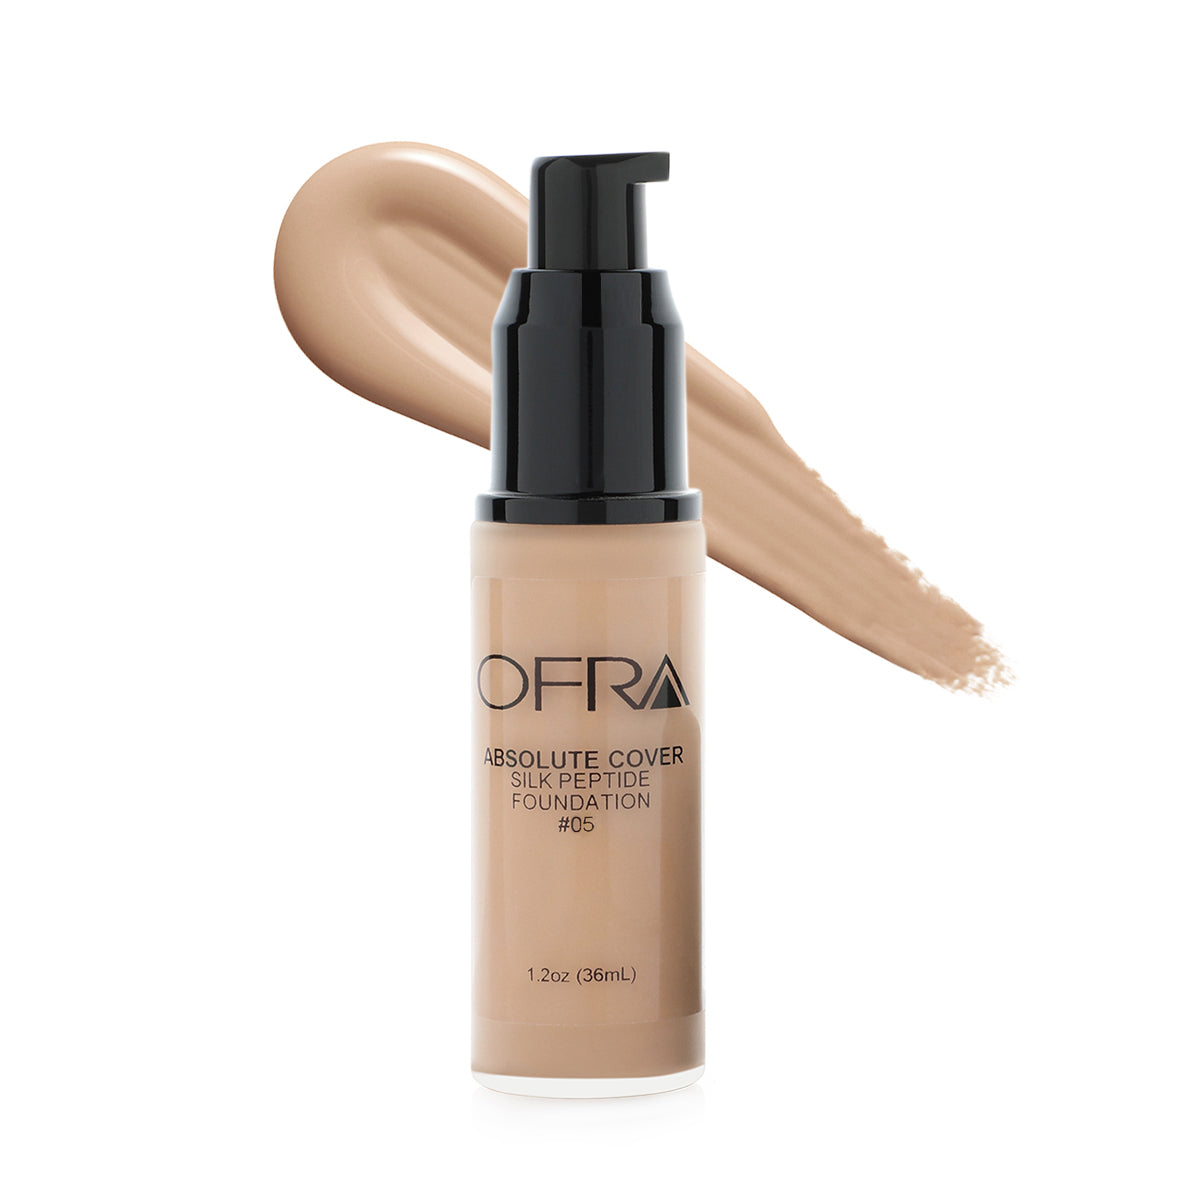 Absolute Cover Silk Peptide Foundation #5